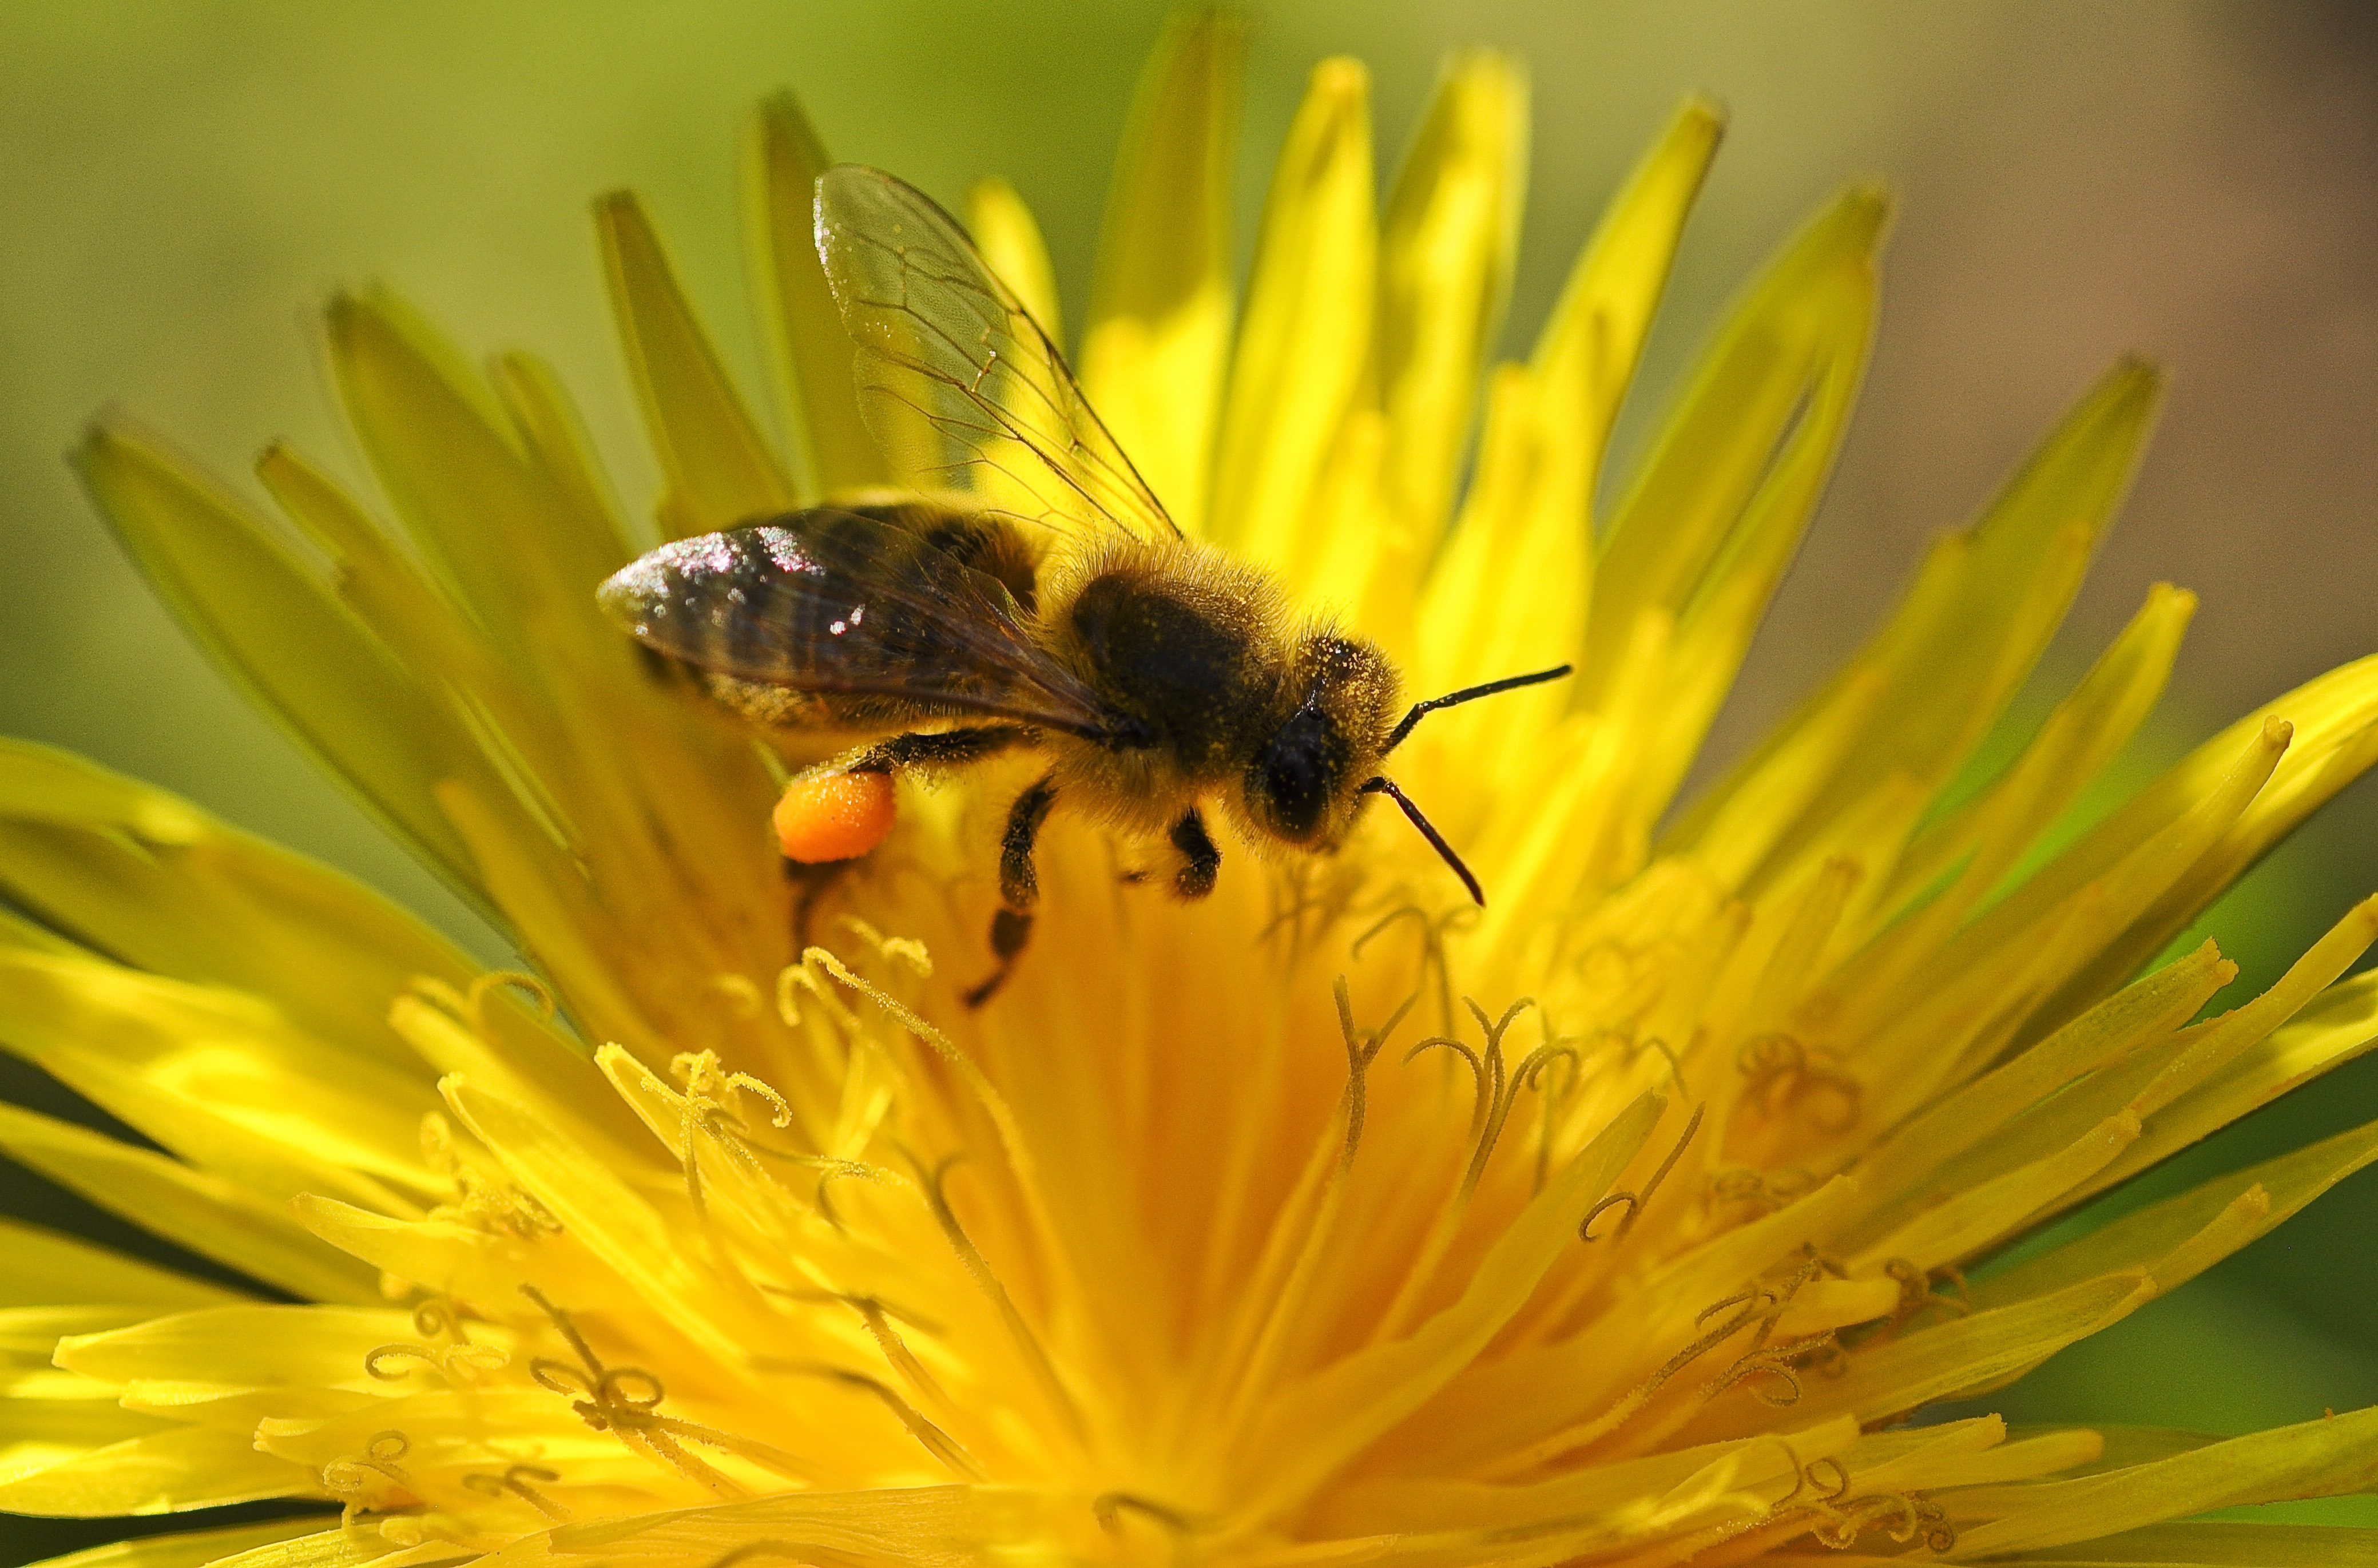 74979 Screensavers and Wallpapers Bee for phone. Download flower, macro, bee, pollination, dandelion, ovduapnchik pictures for free